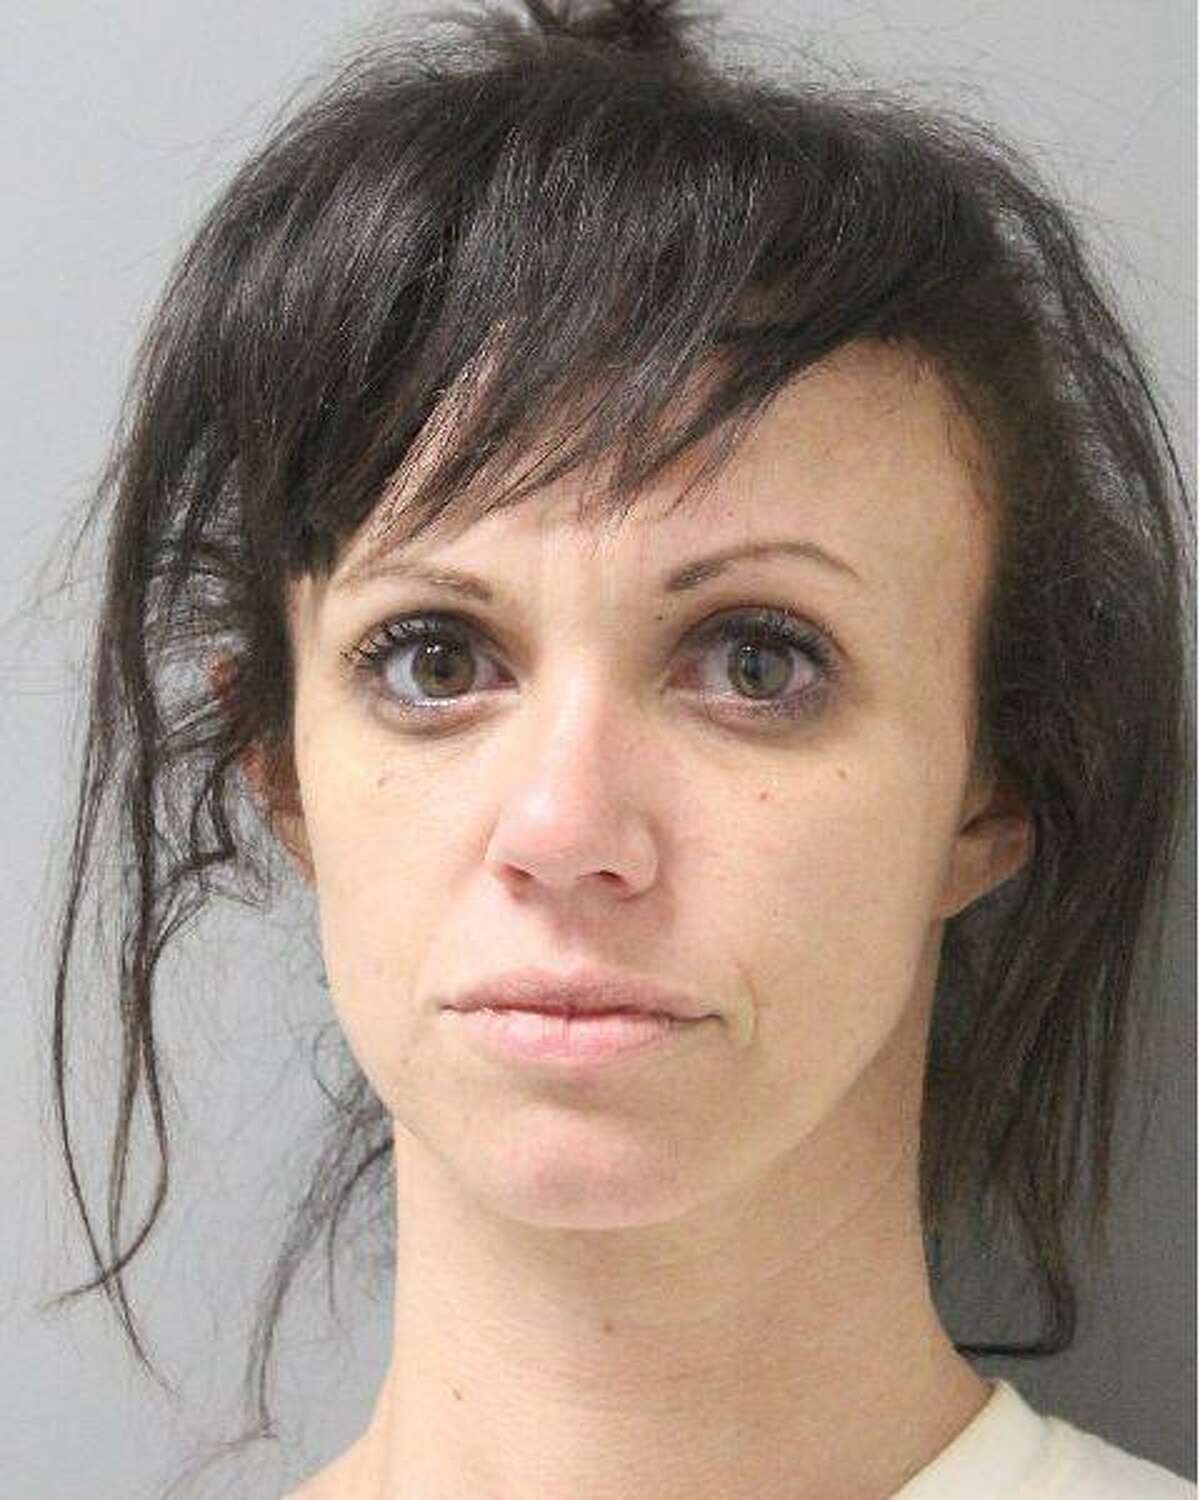 Amanda Bynes Smoking Meth - Former Playboy playmate busted on meth charges in Louisiana